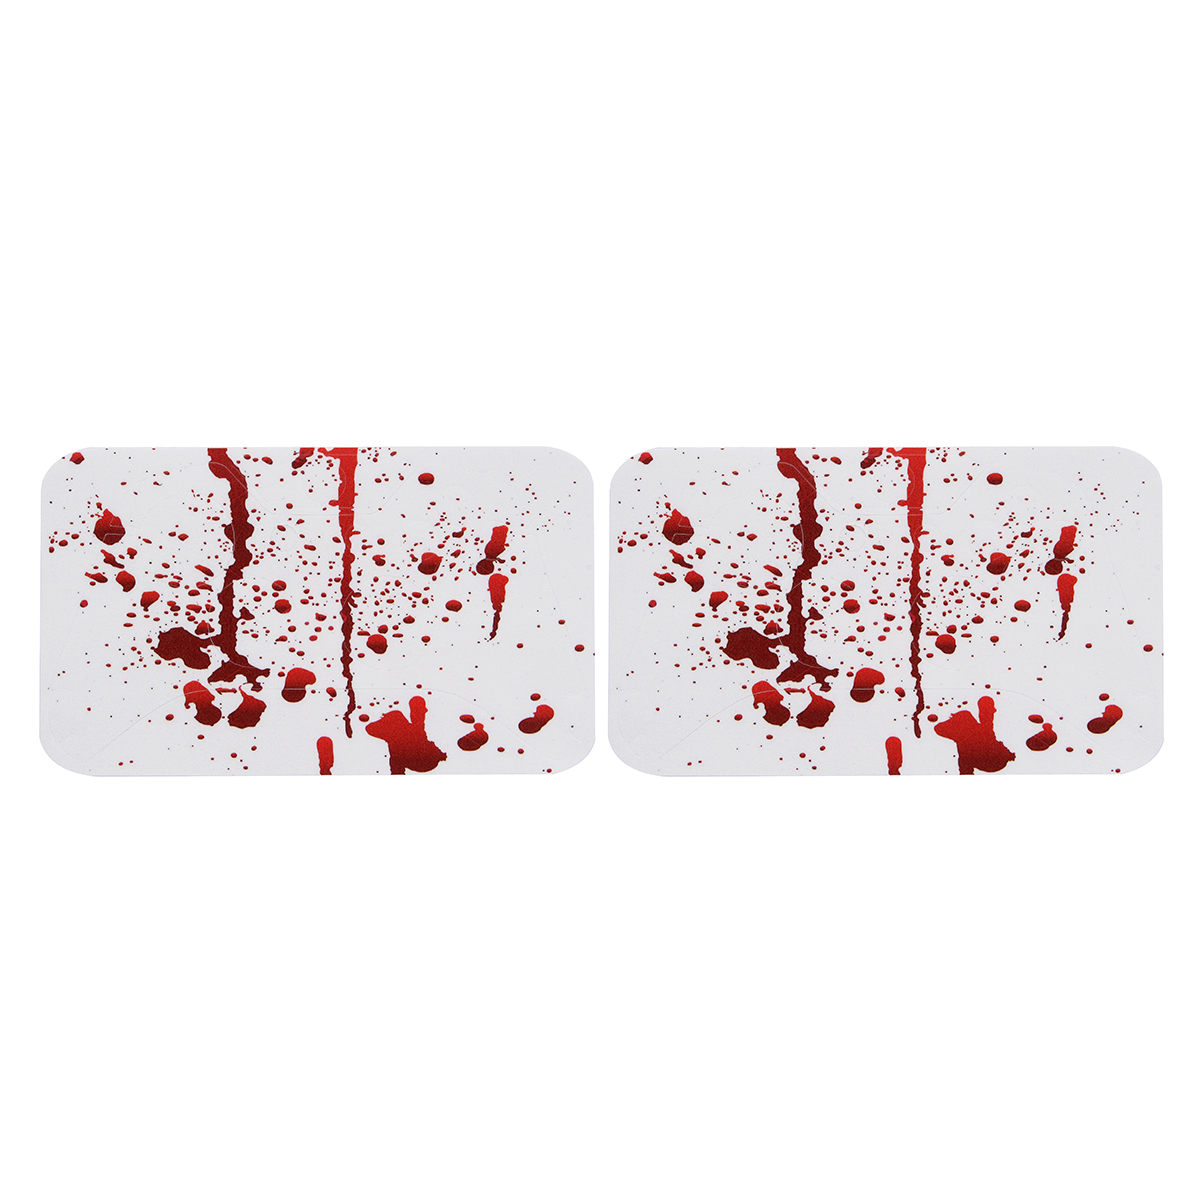 Bloody Skin Decals Stickers Cover for Xbox One S Game Console & 2 Controllers 7